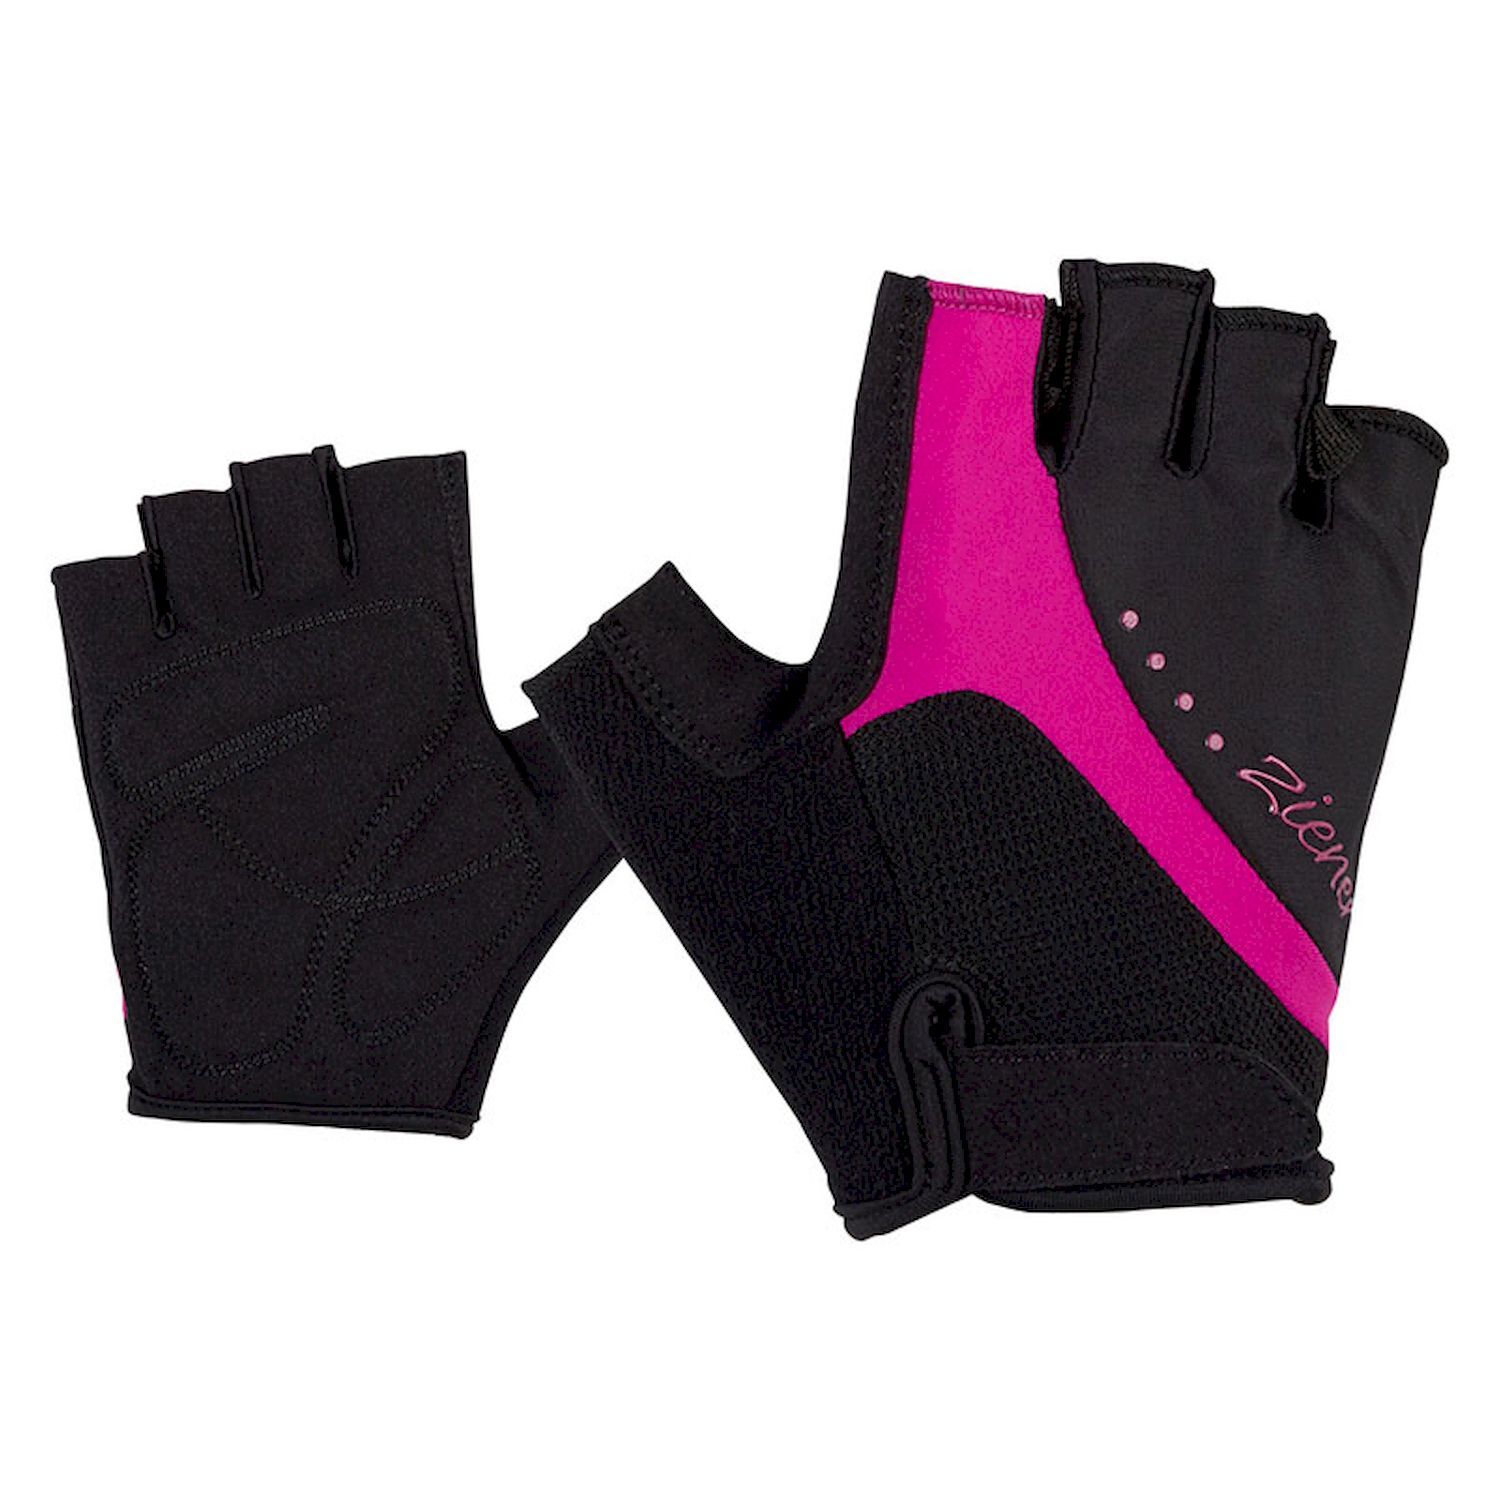 Ziener Cassi Lady - Cycling gloves - Women's